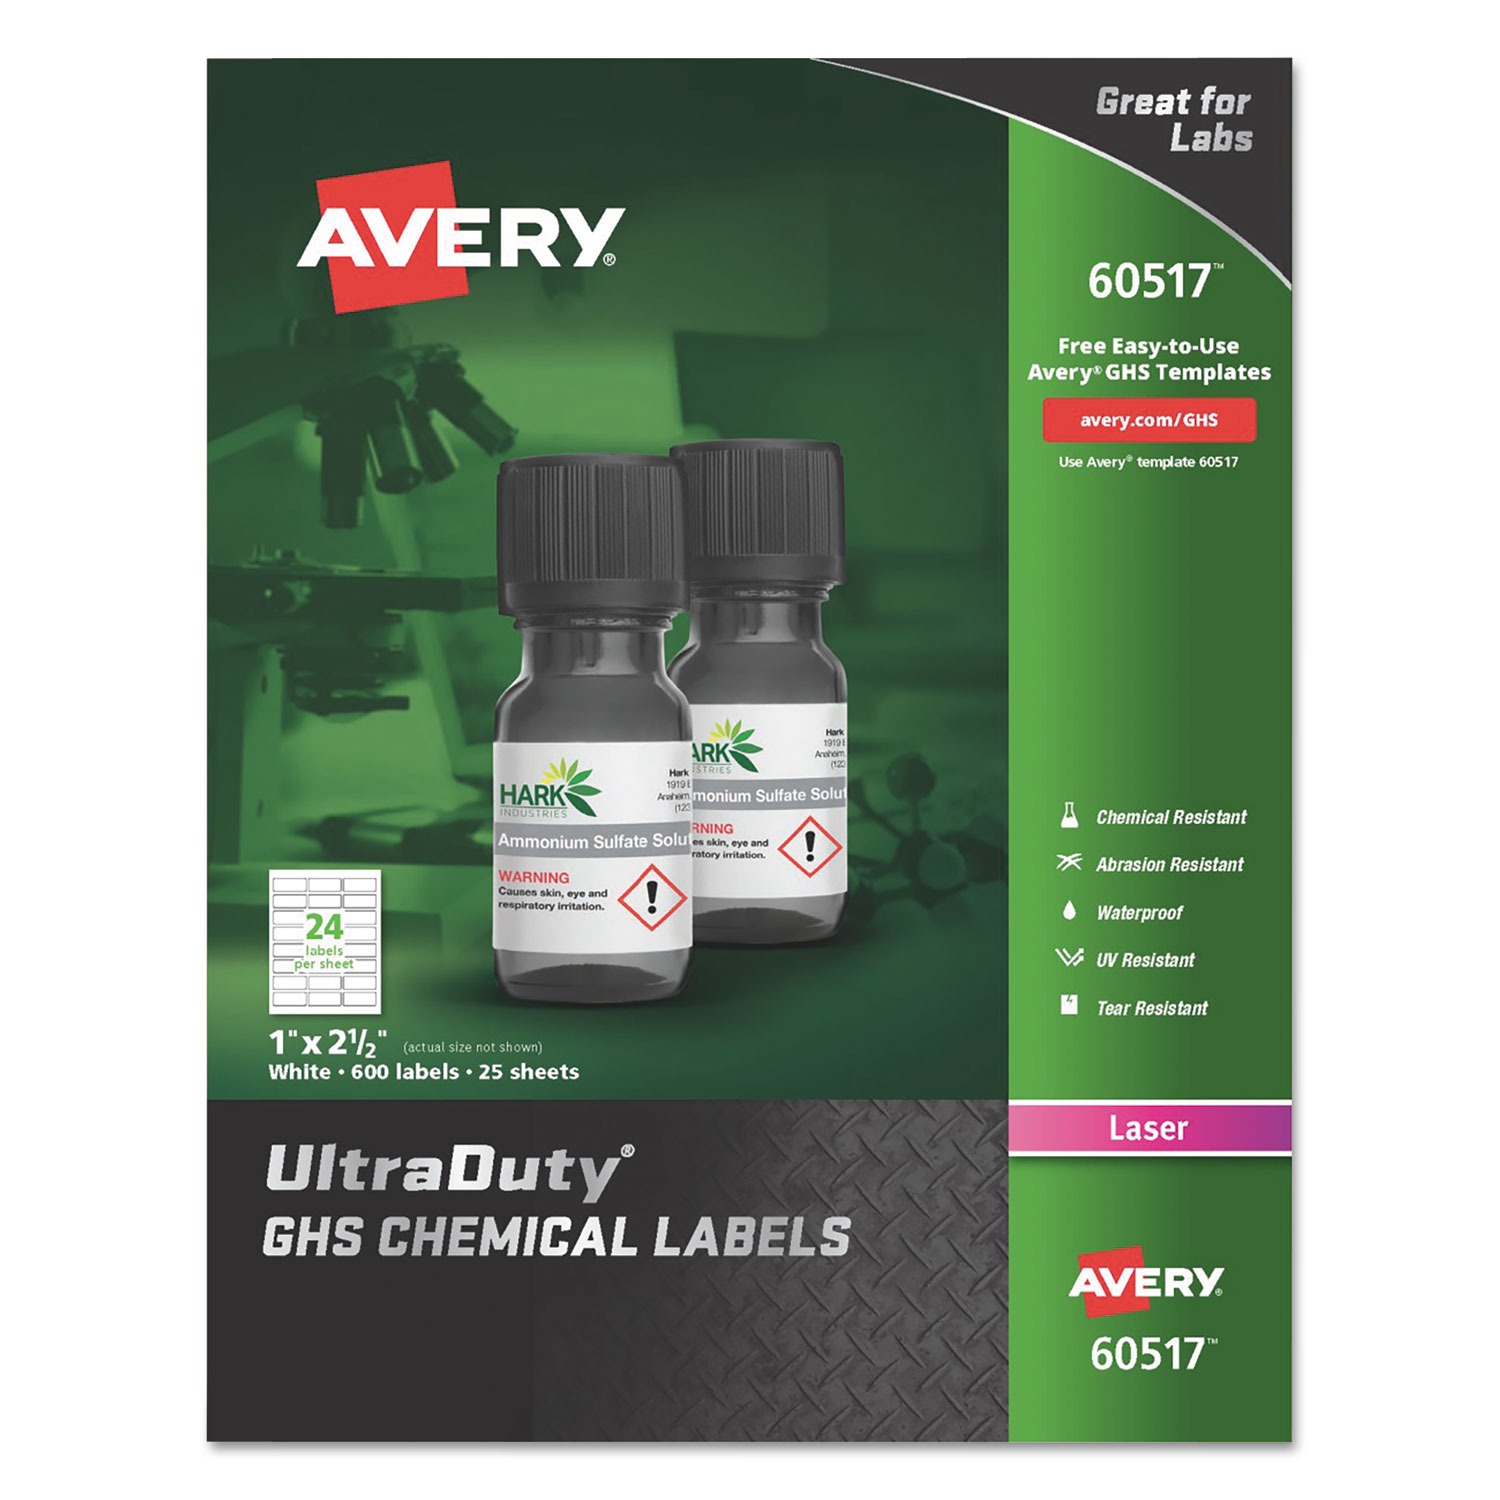  Avery 60517 UltraDuty GHS Chemical Waterproof and UV Resistant Labels, 1 x 2.5, White, 24/Sheet, 25 Sheets/Pack (AVE60517) 